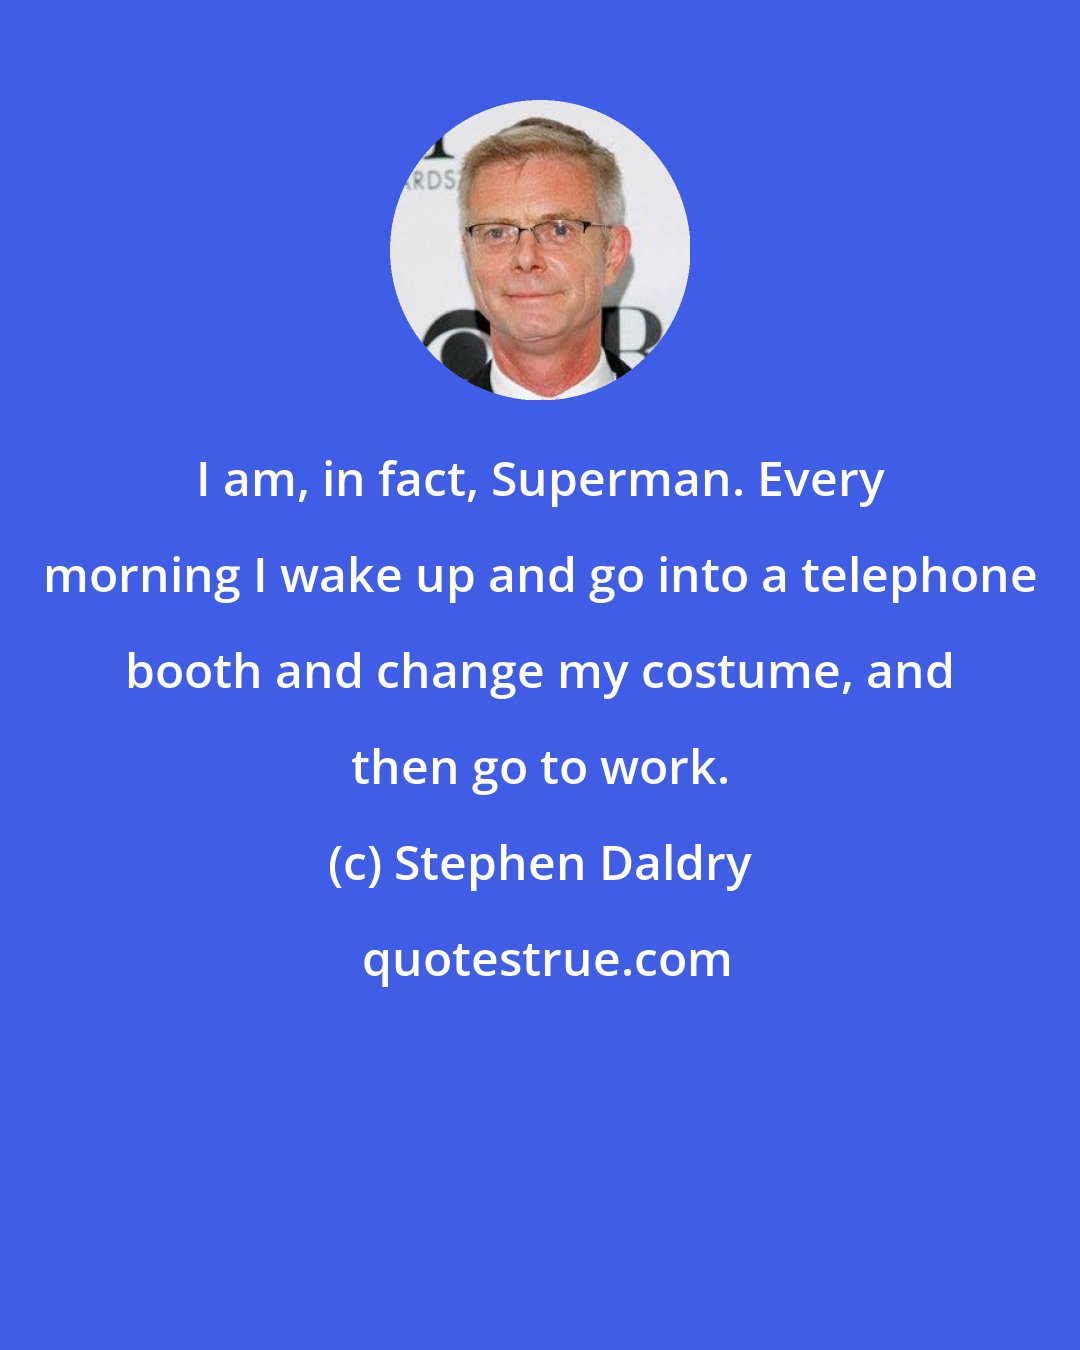 Stephen Daldry: I am, in fact, Superman. Every morning I wake up and go into a telephone booth and change my costume, and then go to work.